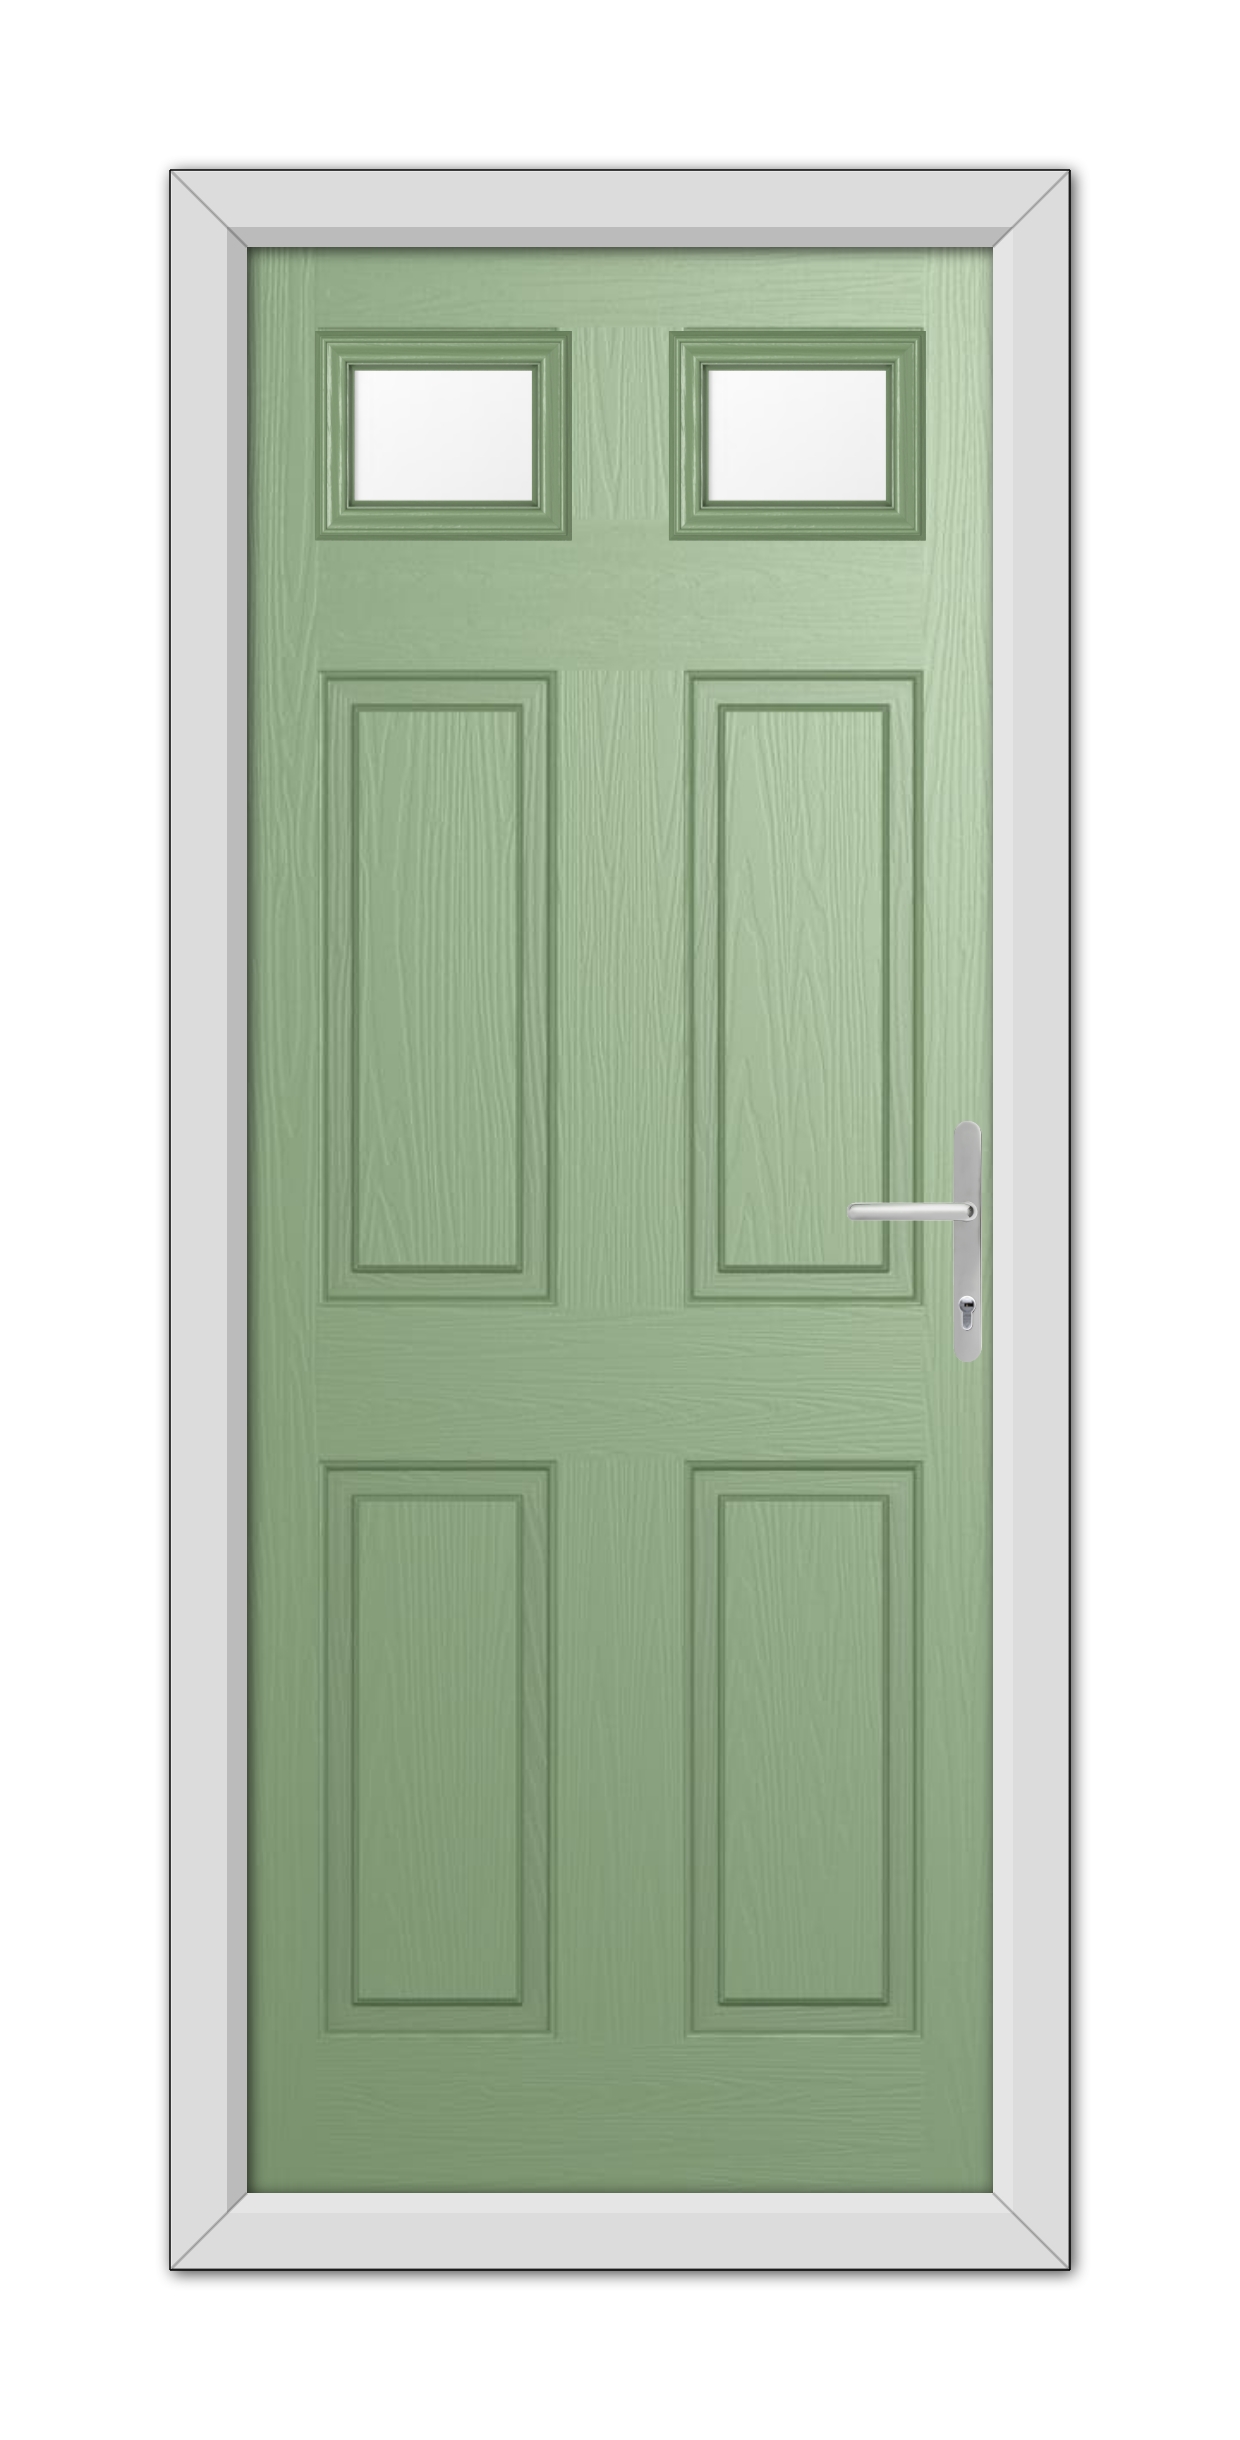 A Chartwell Green Middleton Glazed 2 Composite Door 48mm Timber Core with four square panels and three rectangular glass windows set in a white frame, featuring a modern handle.